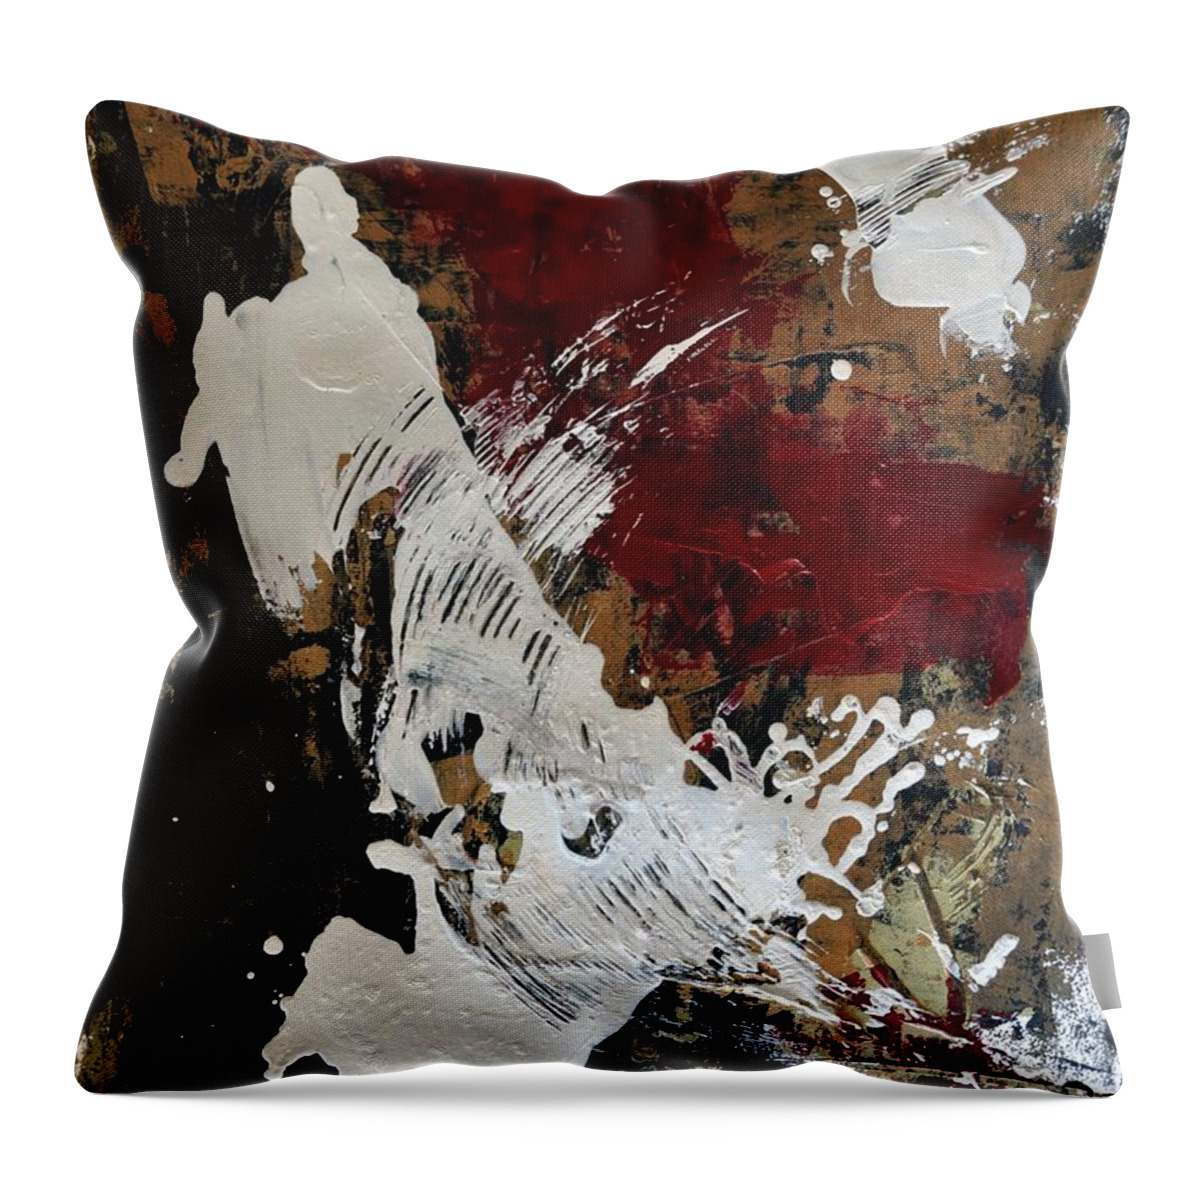 Sonal Raje Throw Pillow featuring the painting Deliverance by Sonal Raje